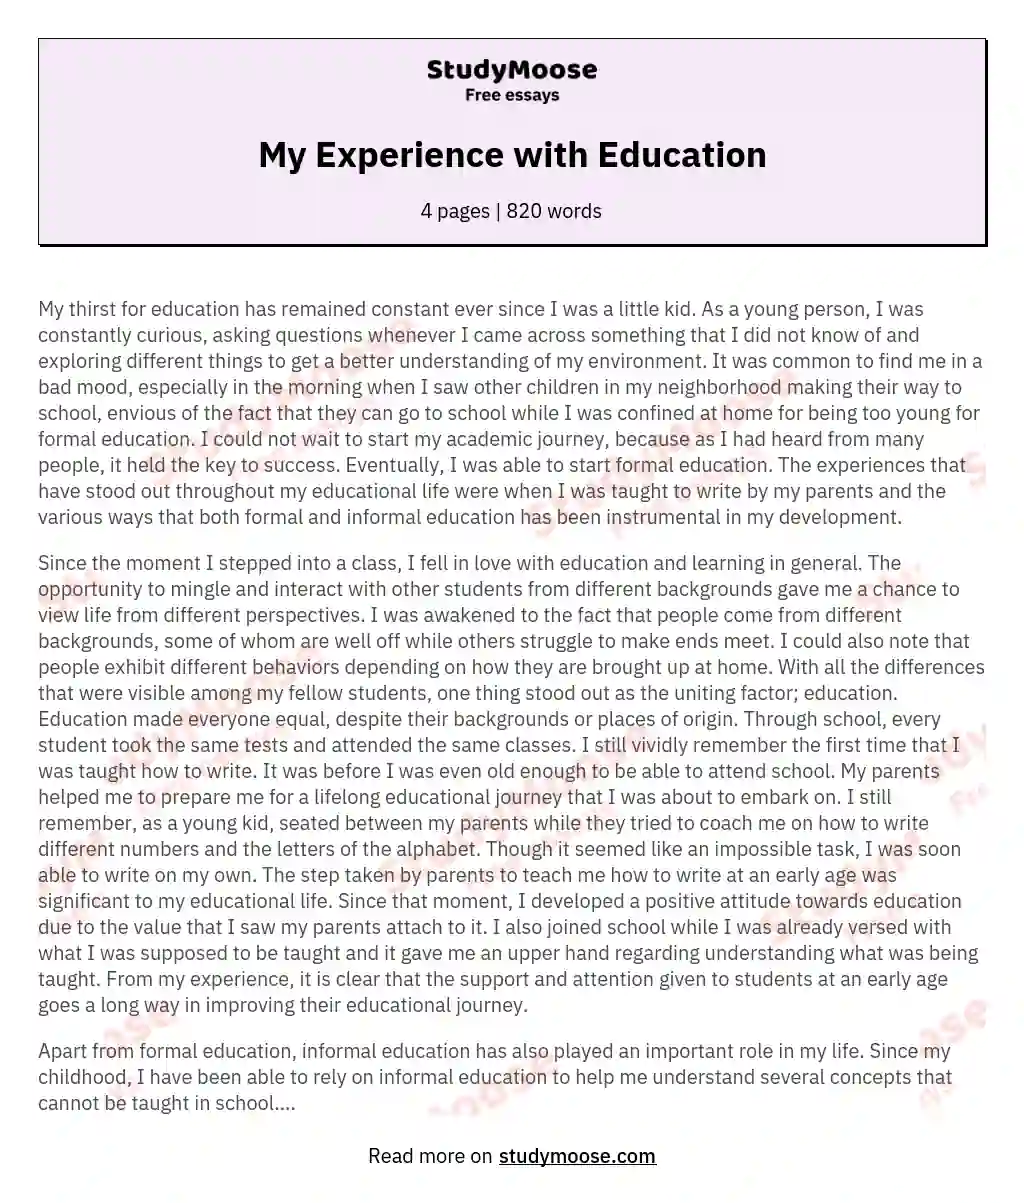 essay about practice teaching experience